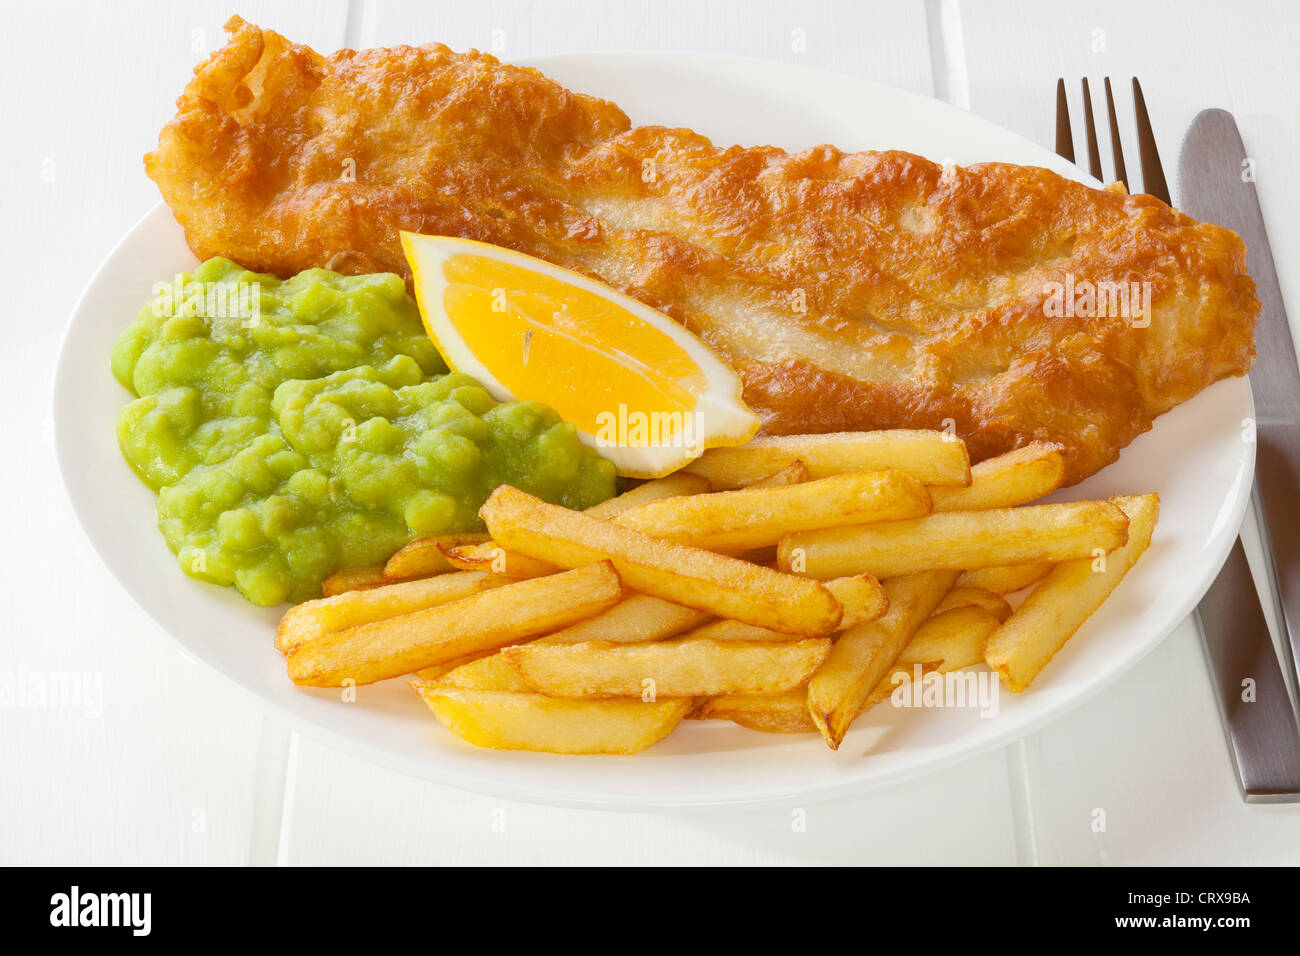 Battered fish served with chips and mushy peas Stock Photo